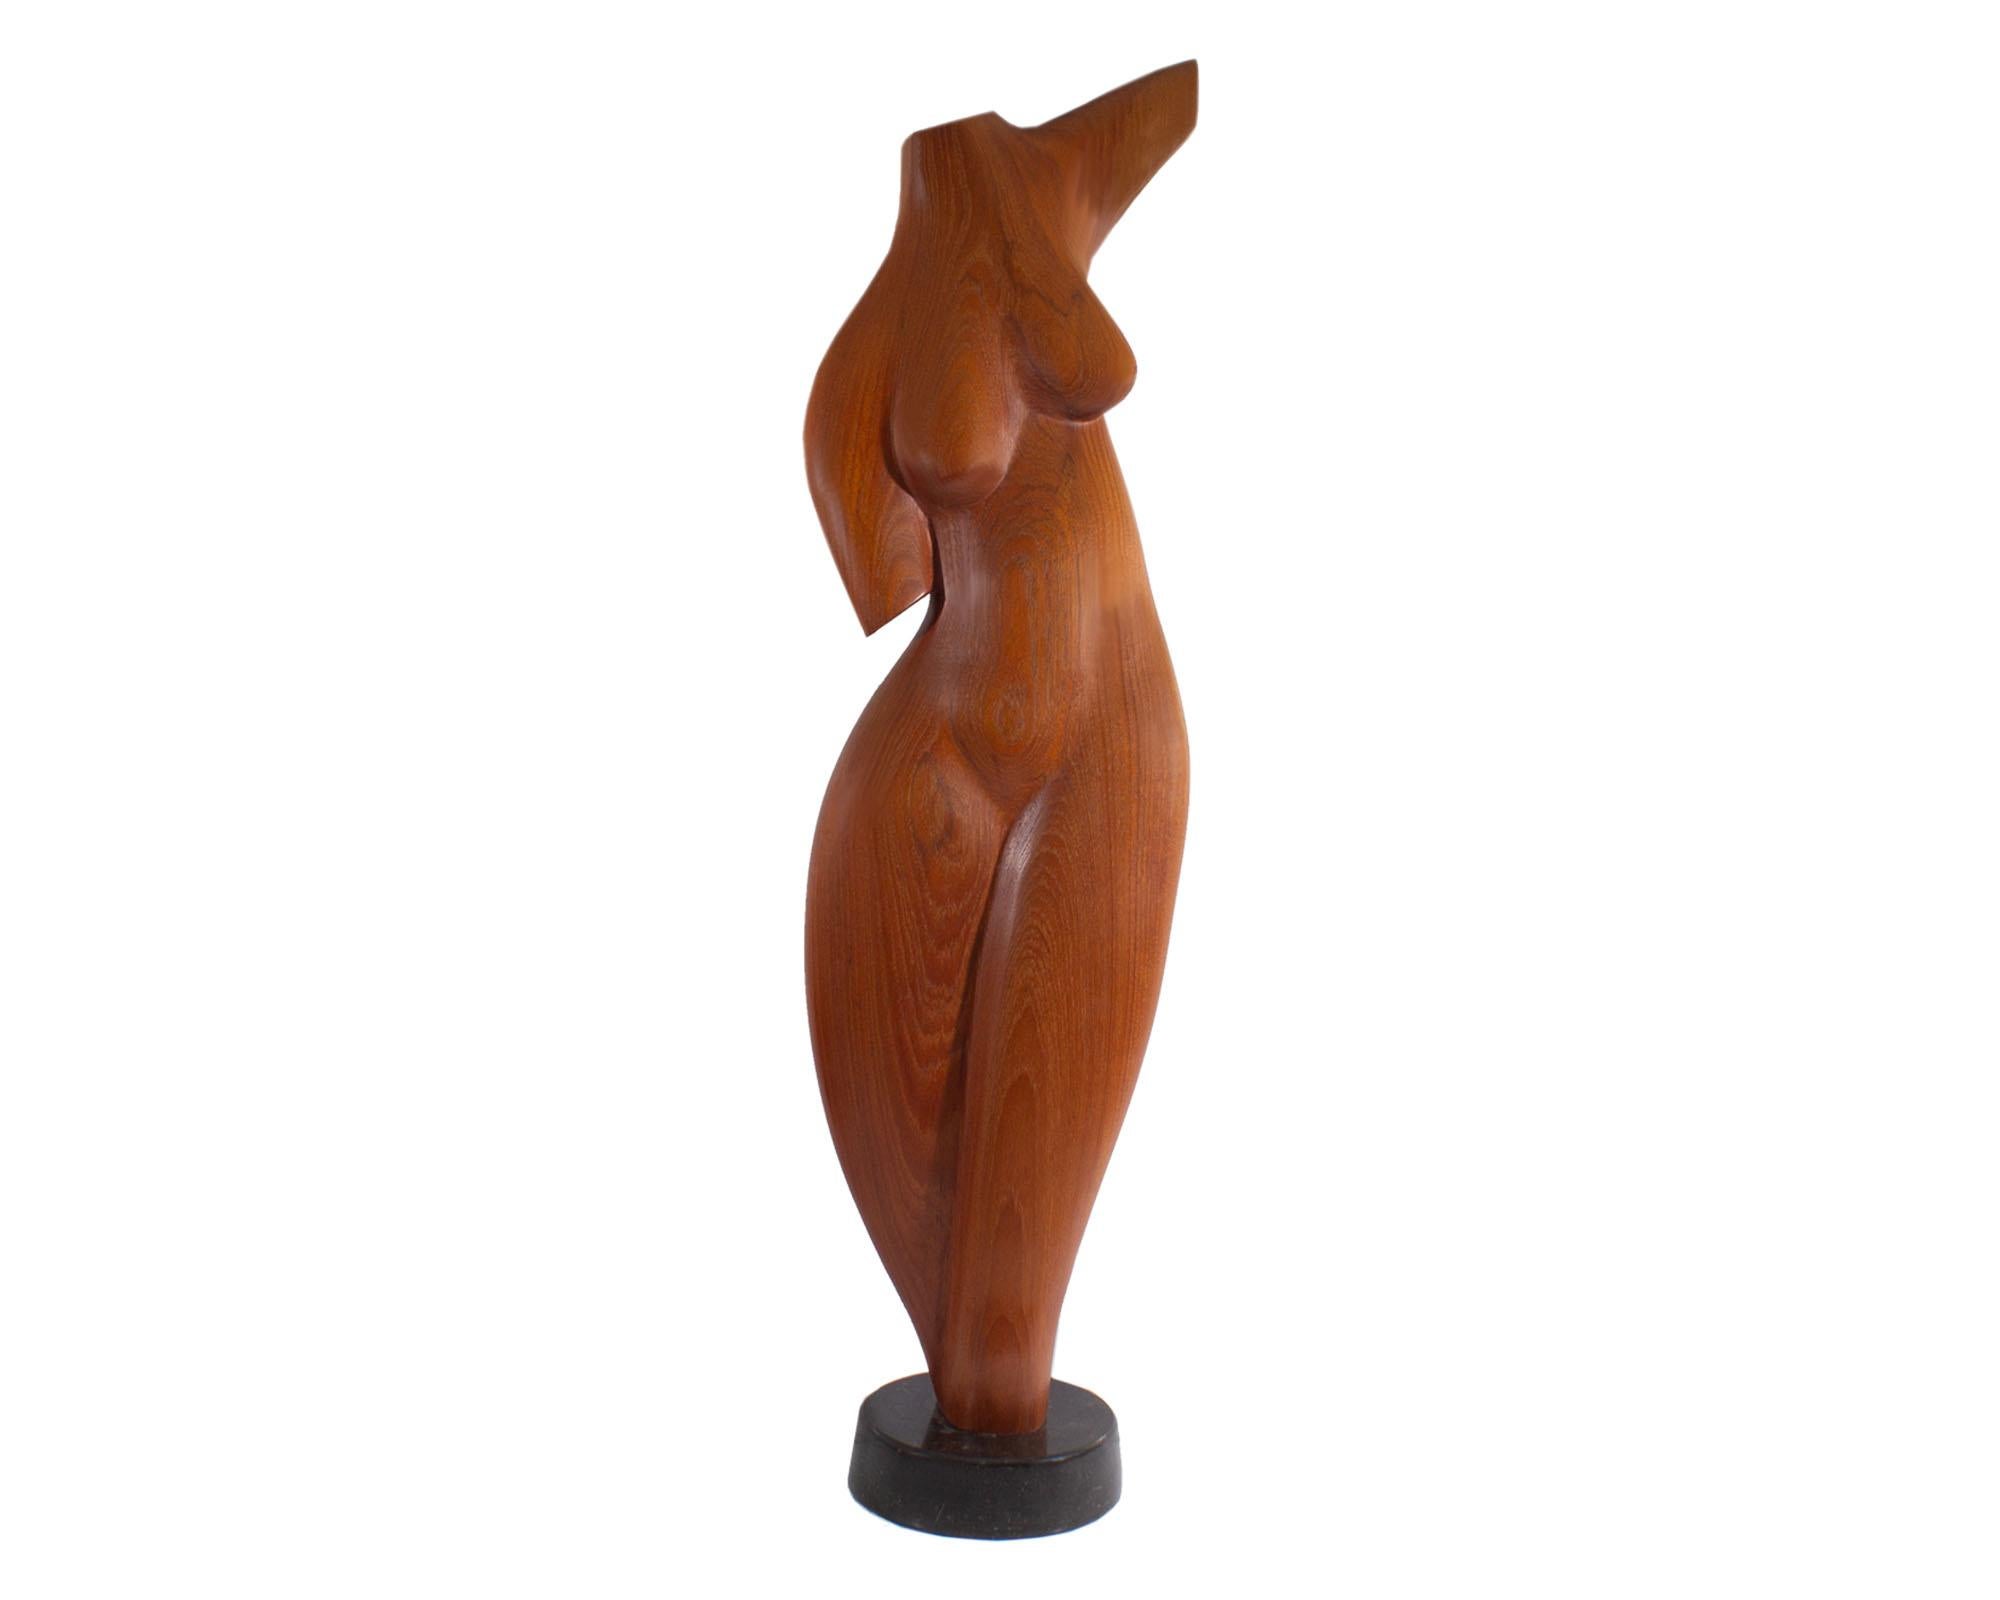 A 1984 abstract wood sculpture of a nude woman carved by Danish-American sculptor Gert Olsen (born 1937). Signed 